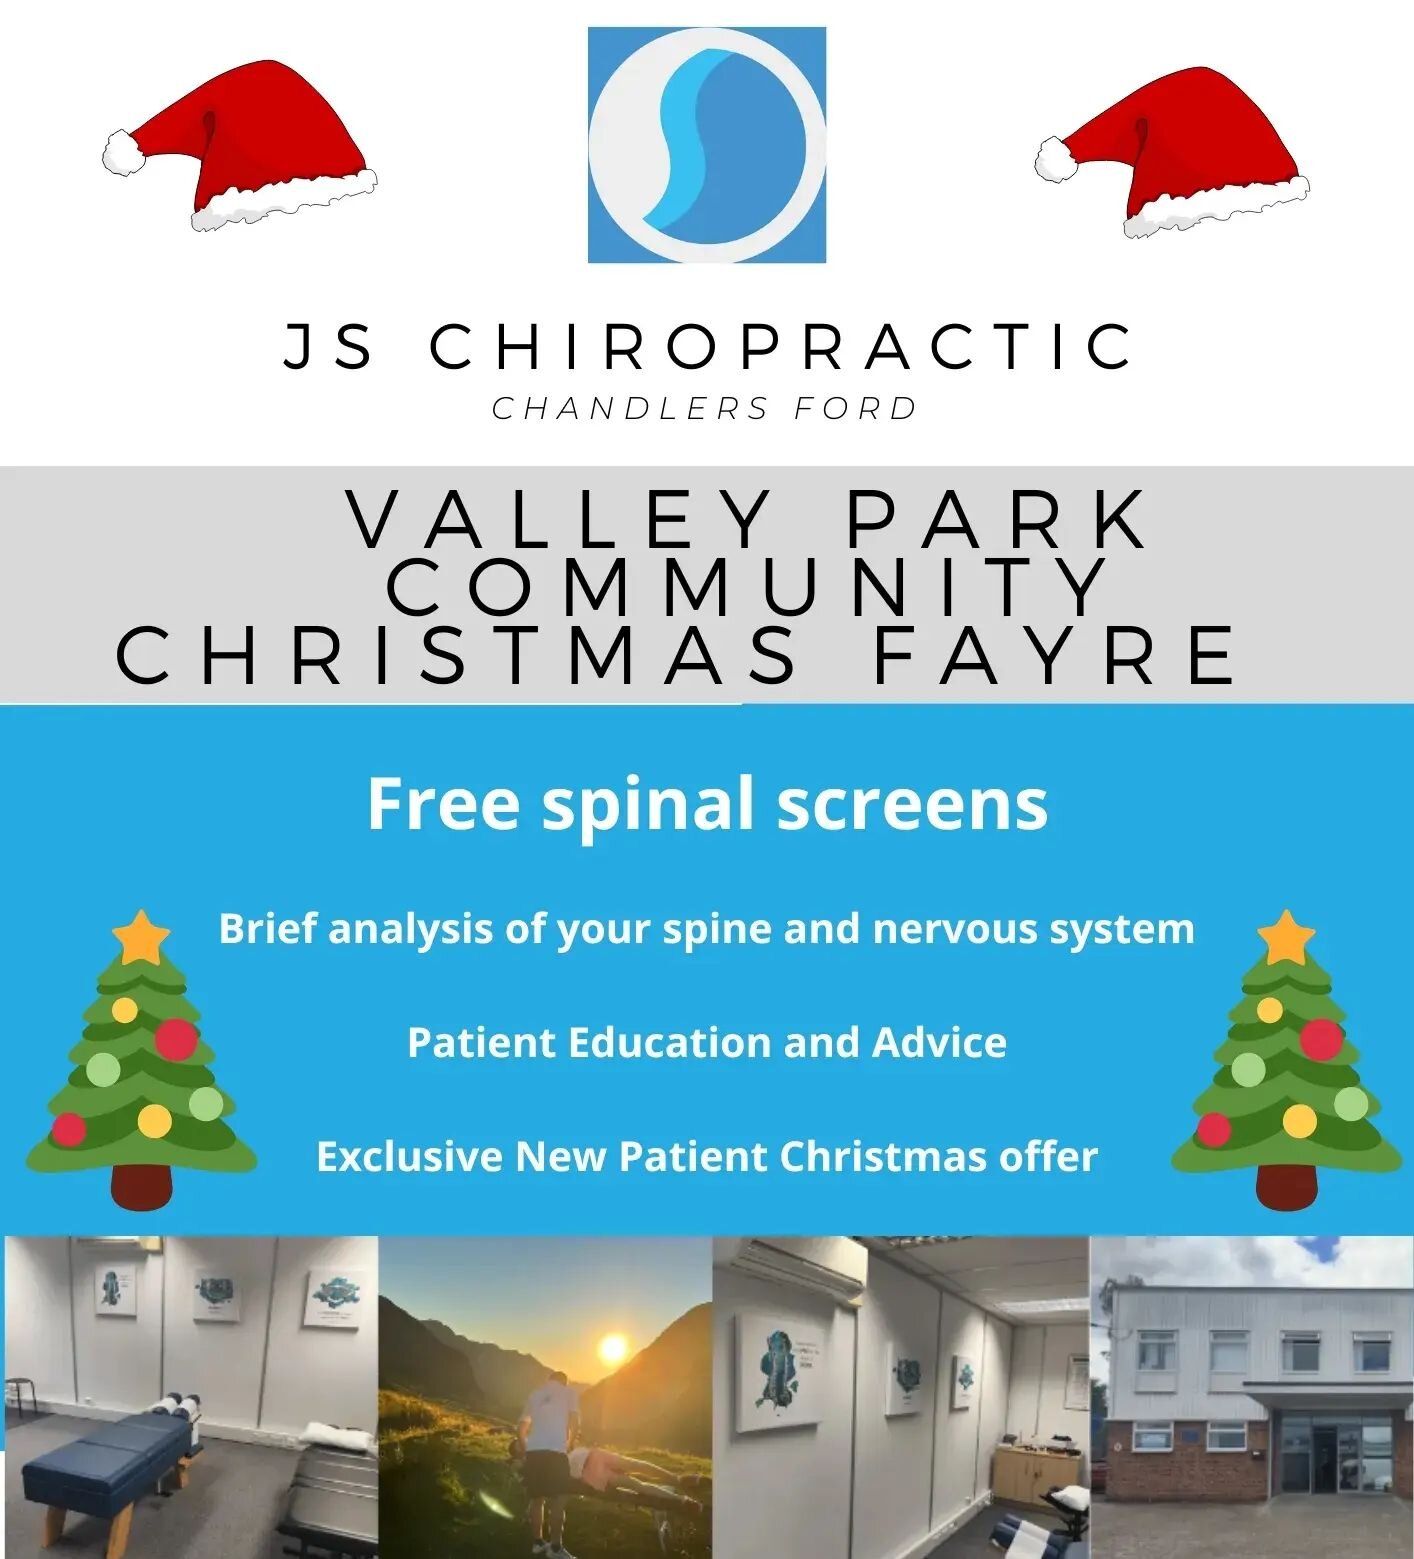 Come on down on Sunday the 4th of December to to the Valley Park Community Christmas Fayre

We will be there providing Free spinal Screens, education and advice to the local community.

🎄 Mini medical history 

🎄Mini Chiropractic exam 

🎄 Report o